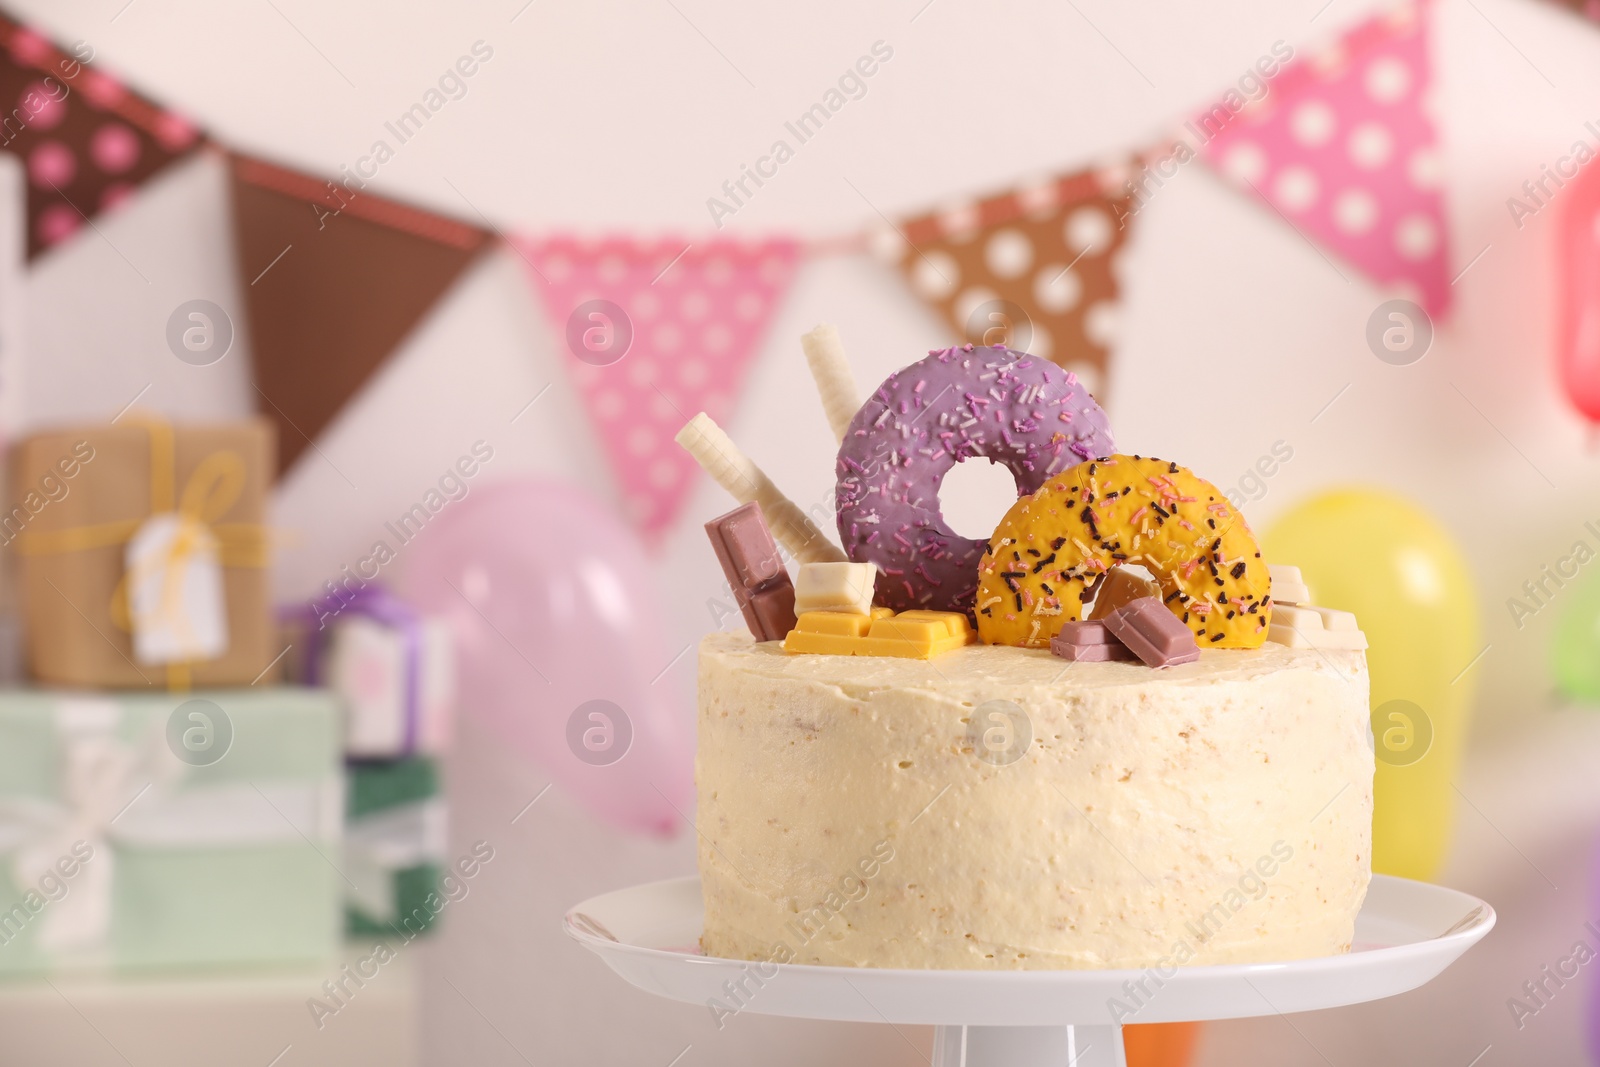 Photo of White stand with delicious cake decorated with sweets against blurred background, space for text